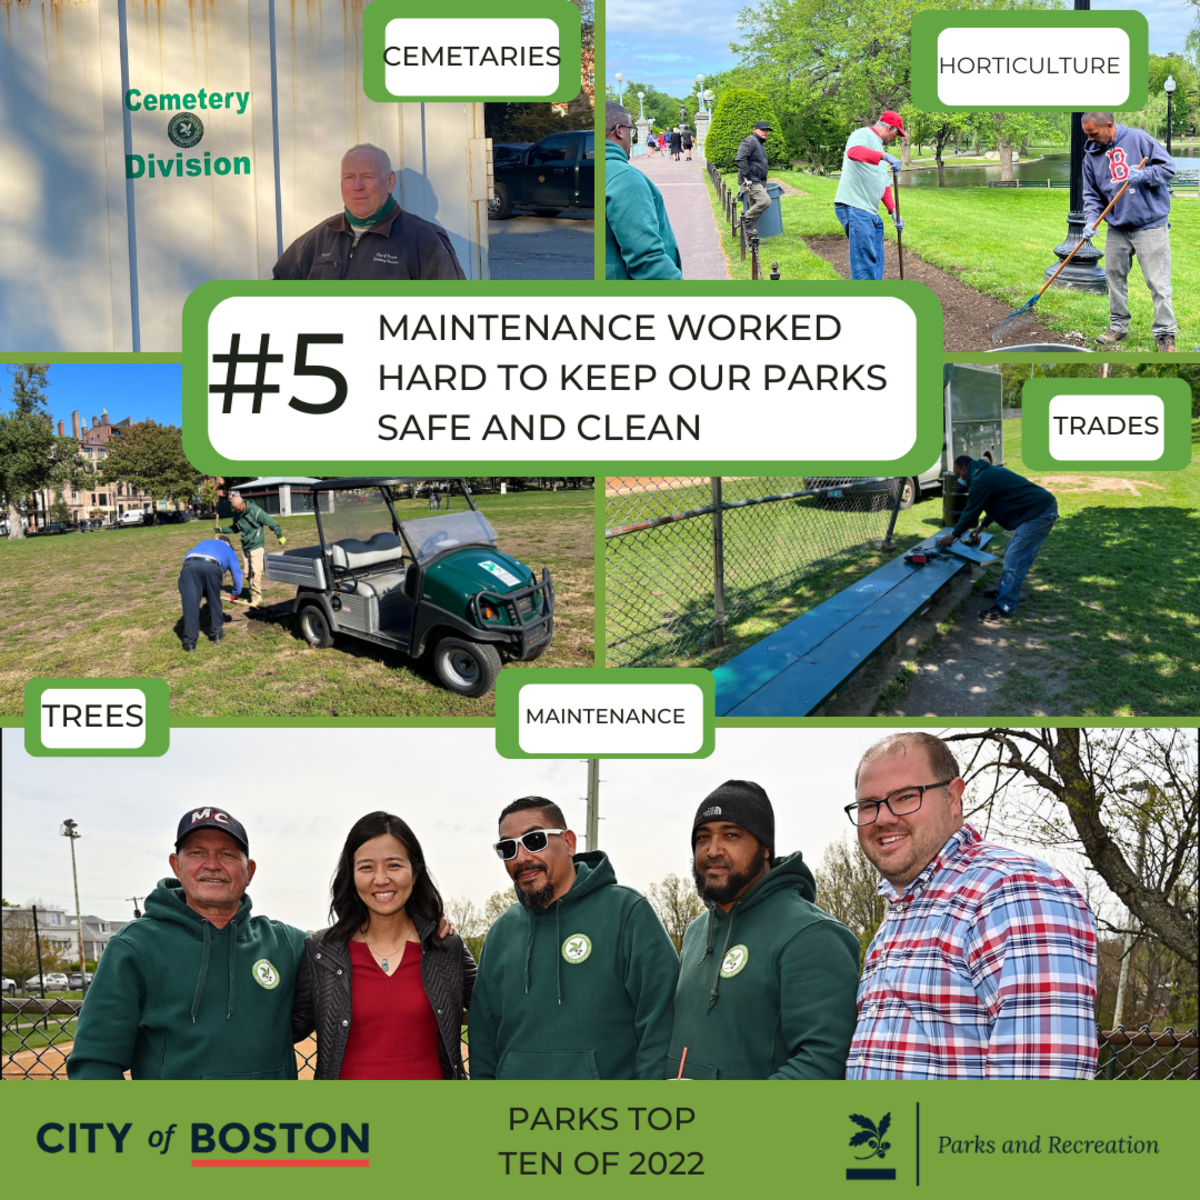 Parks top ten #5 Maintenance worked to keep our parks save and clean.  Grid. Cemetery worker. Horticulture planting. Trades worker painting bench. Group of workers with mayor and parks commisioner.